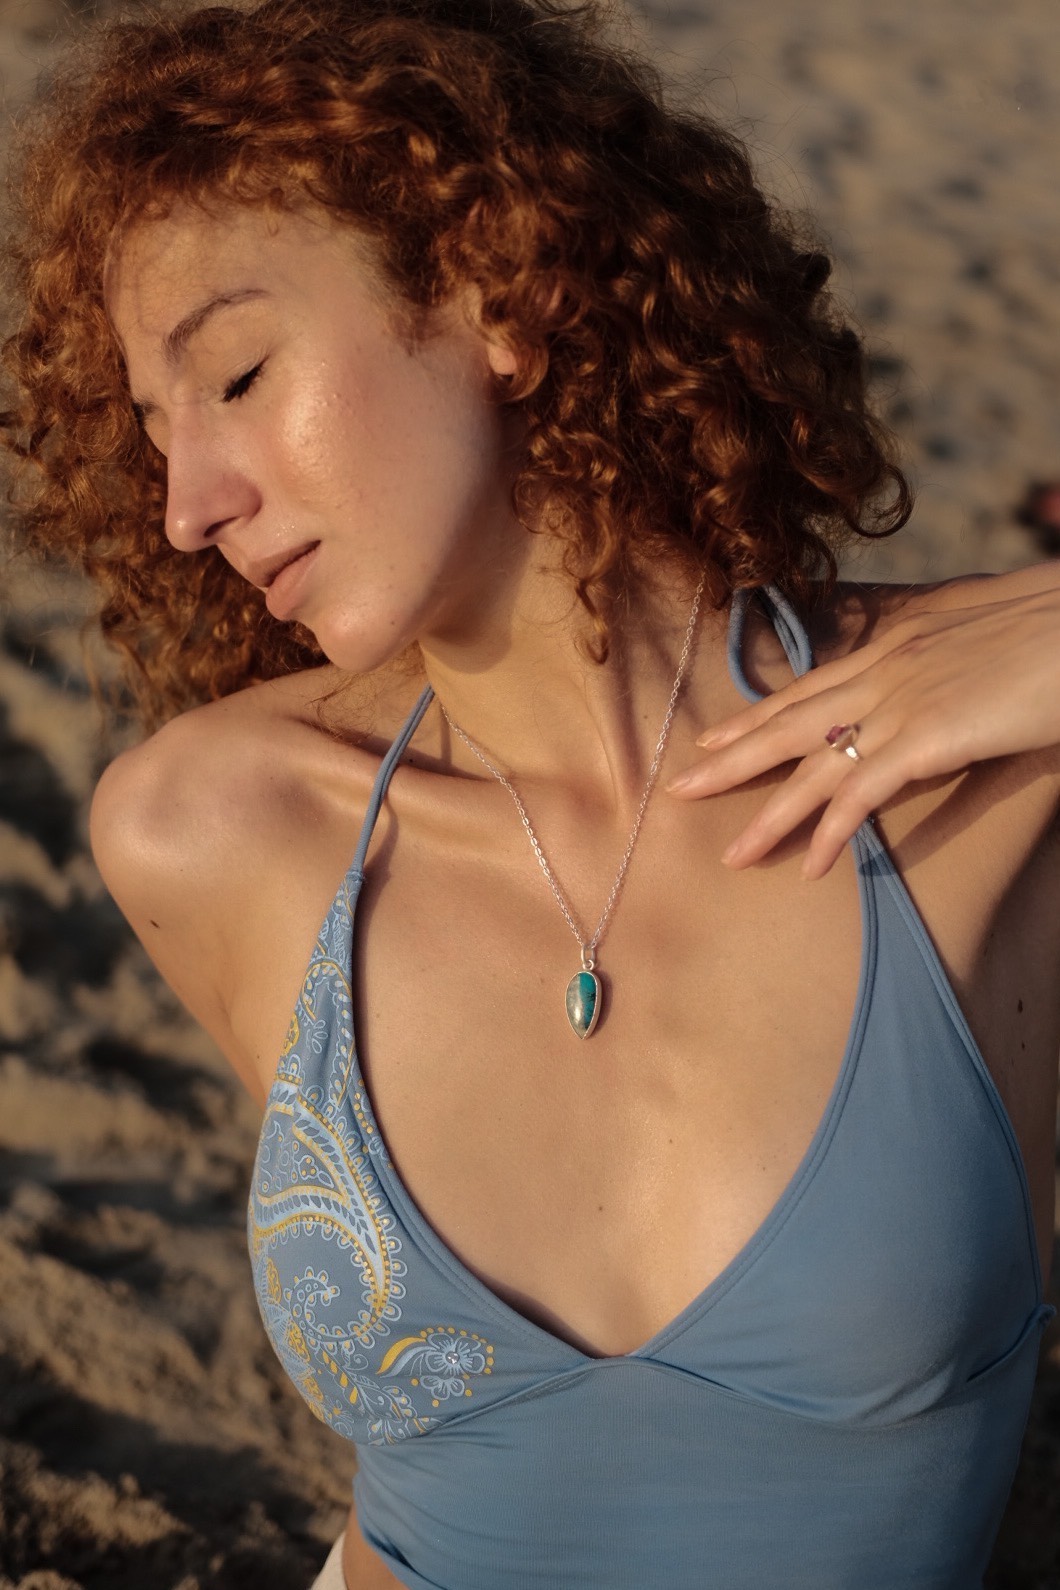 A model wears Soulcraft Jewelry made from gemstones and .999 silver